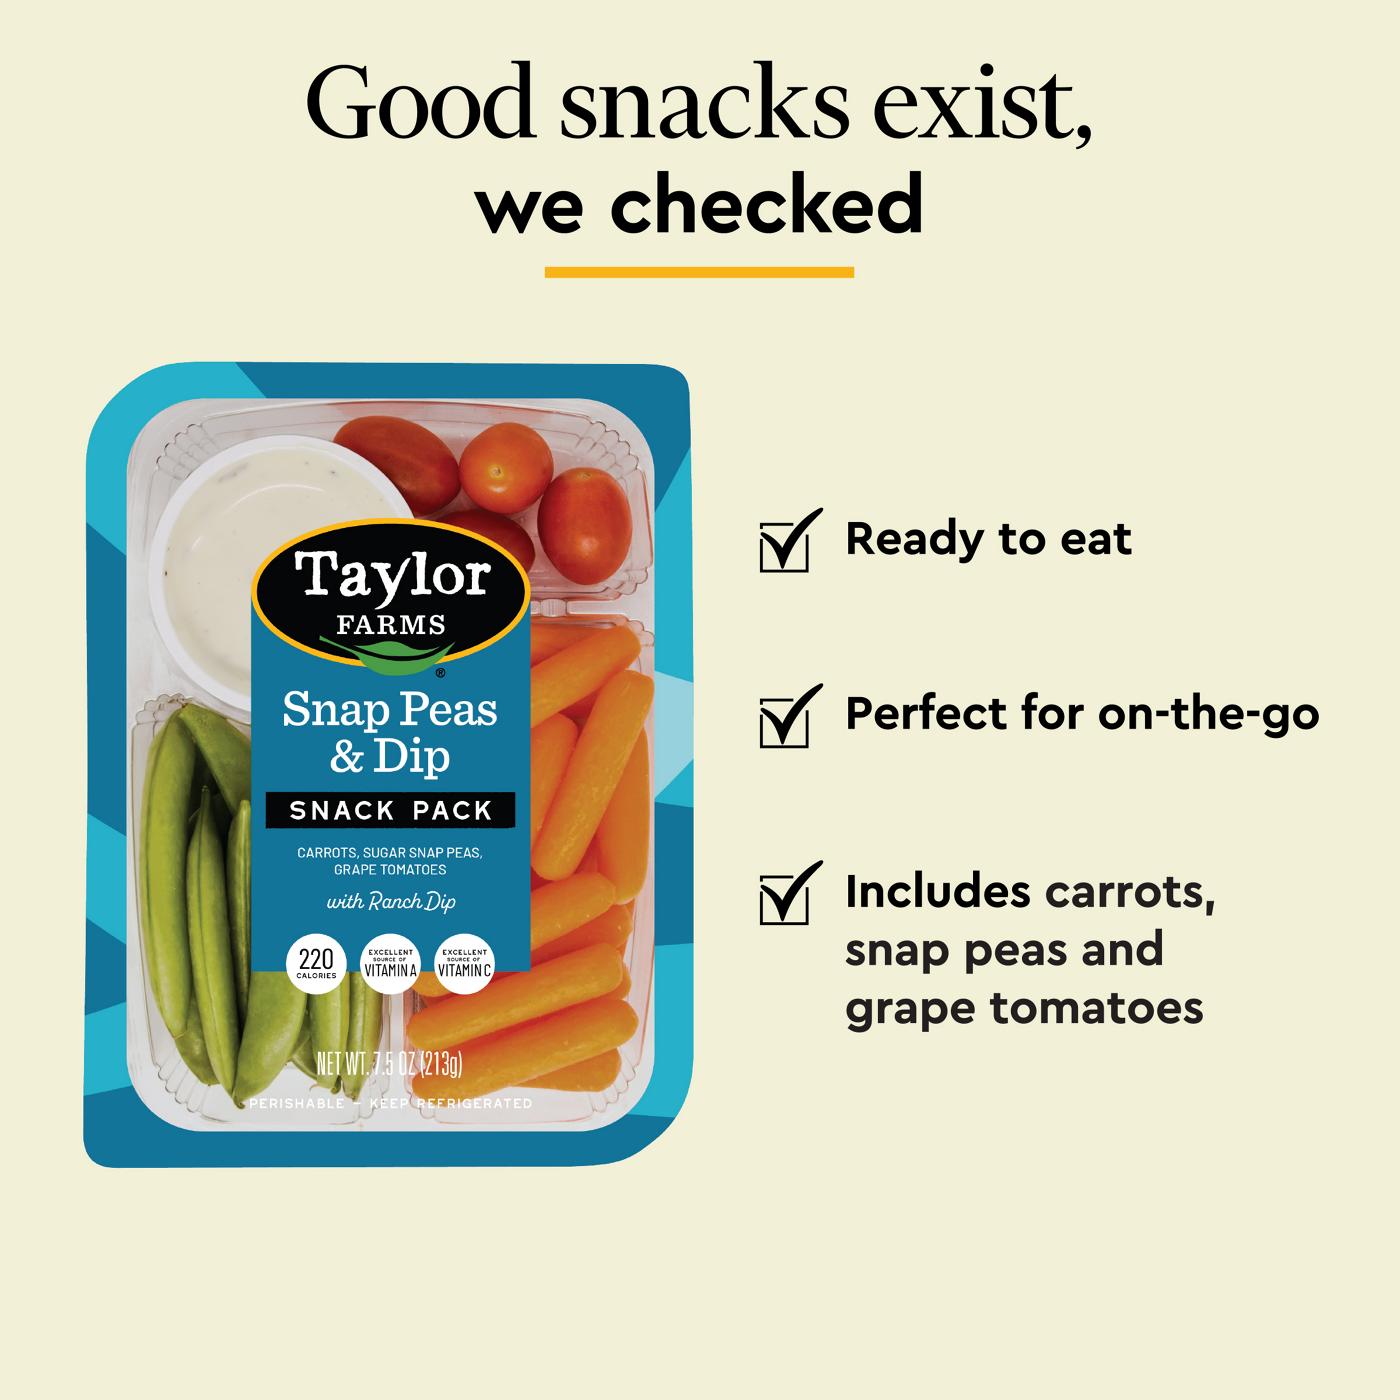 Taylor Farms Snap Peas & Dip Snack Pack; image 2 of 4